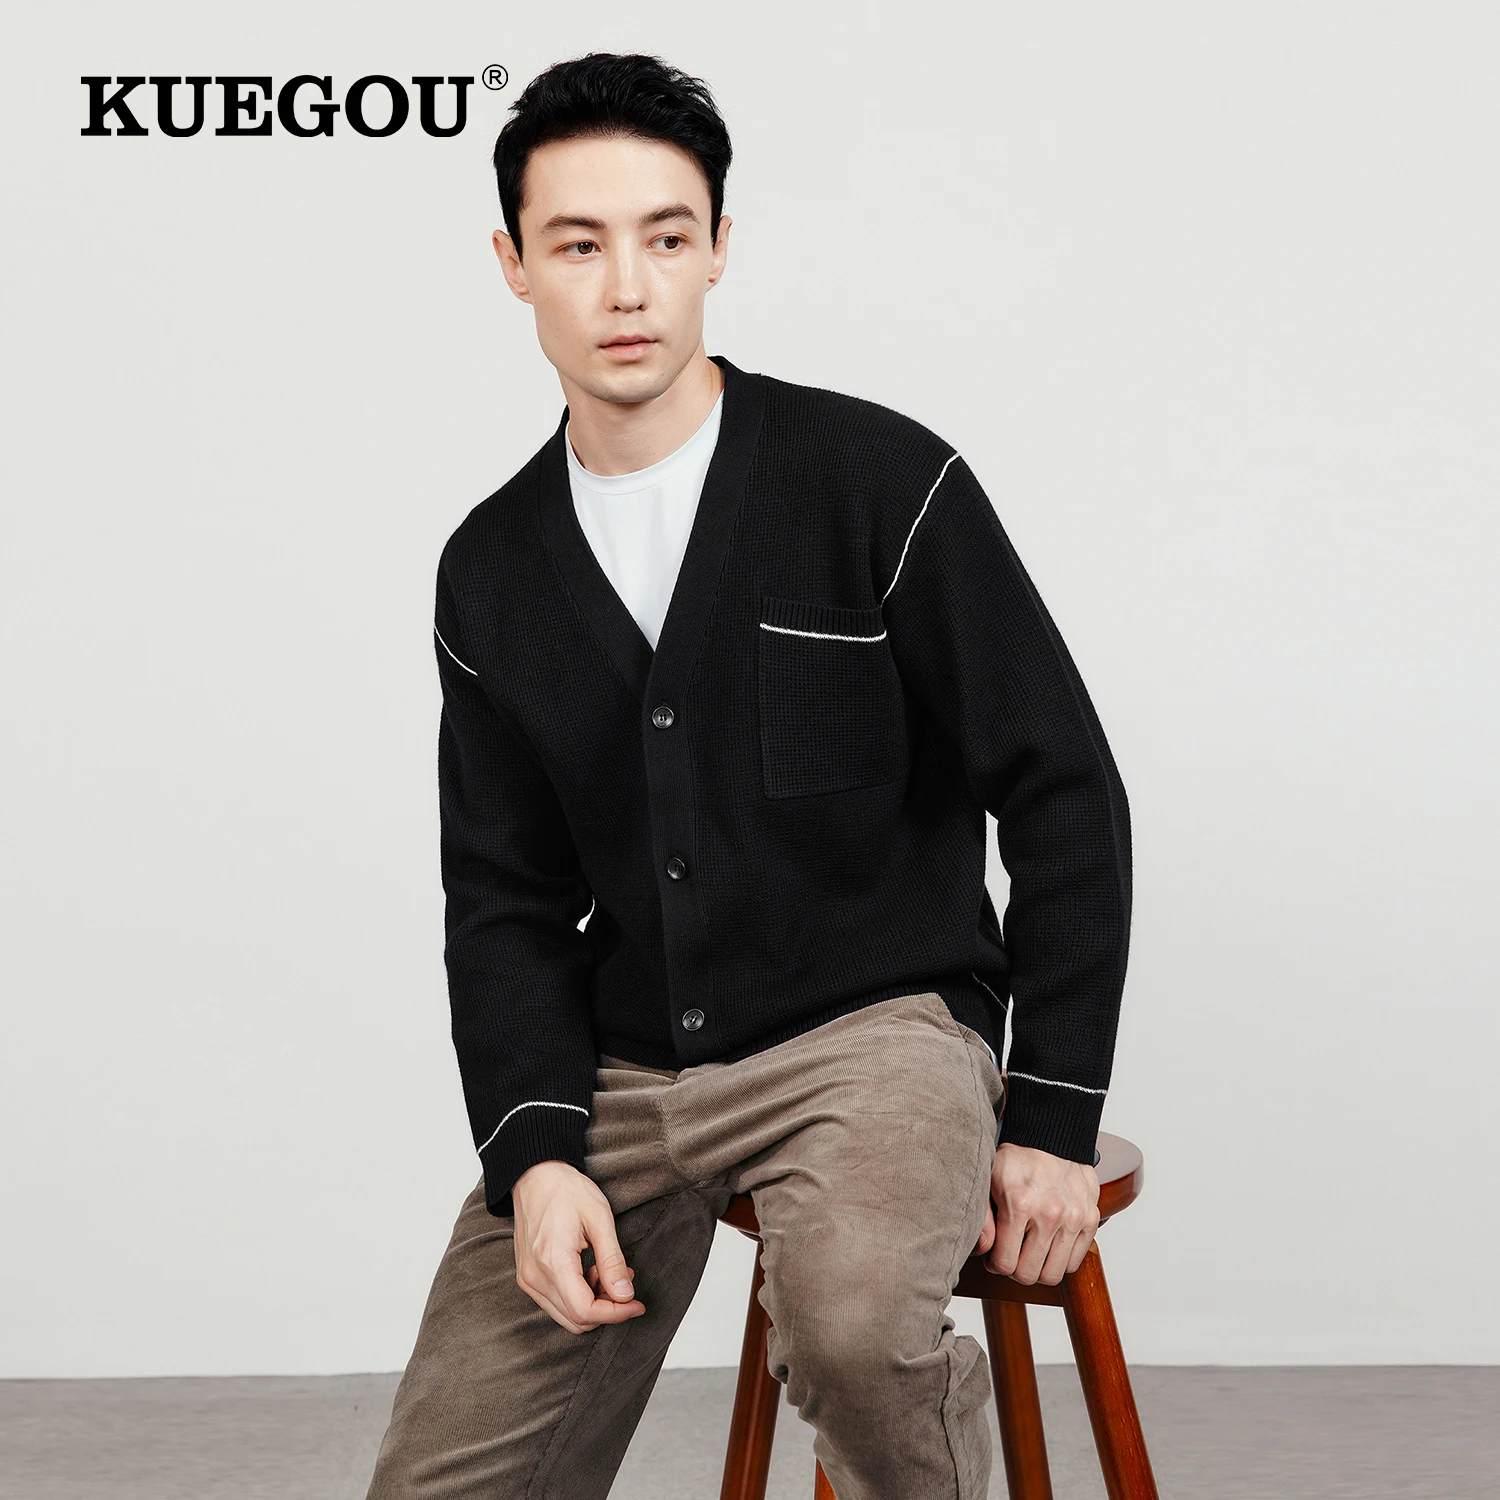 KUEGOU 2022 Autumn Wool Plain Black Red Sweater Men Cardigan Casual Pockets Jumper New For Male Brand Knitted Clothing 91987